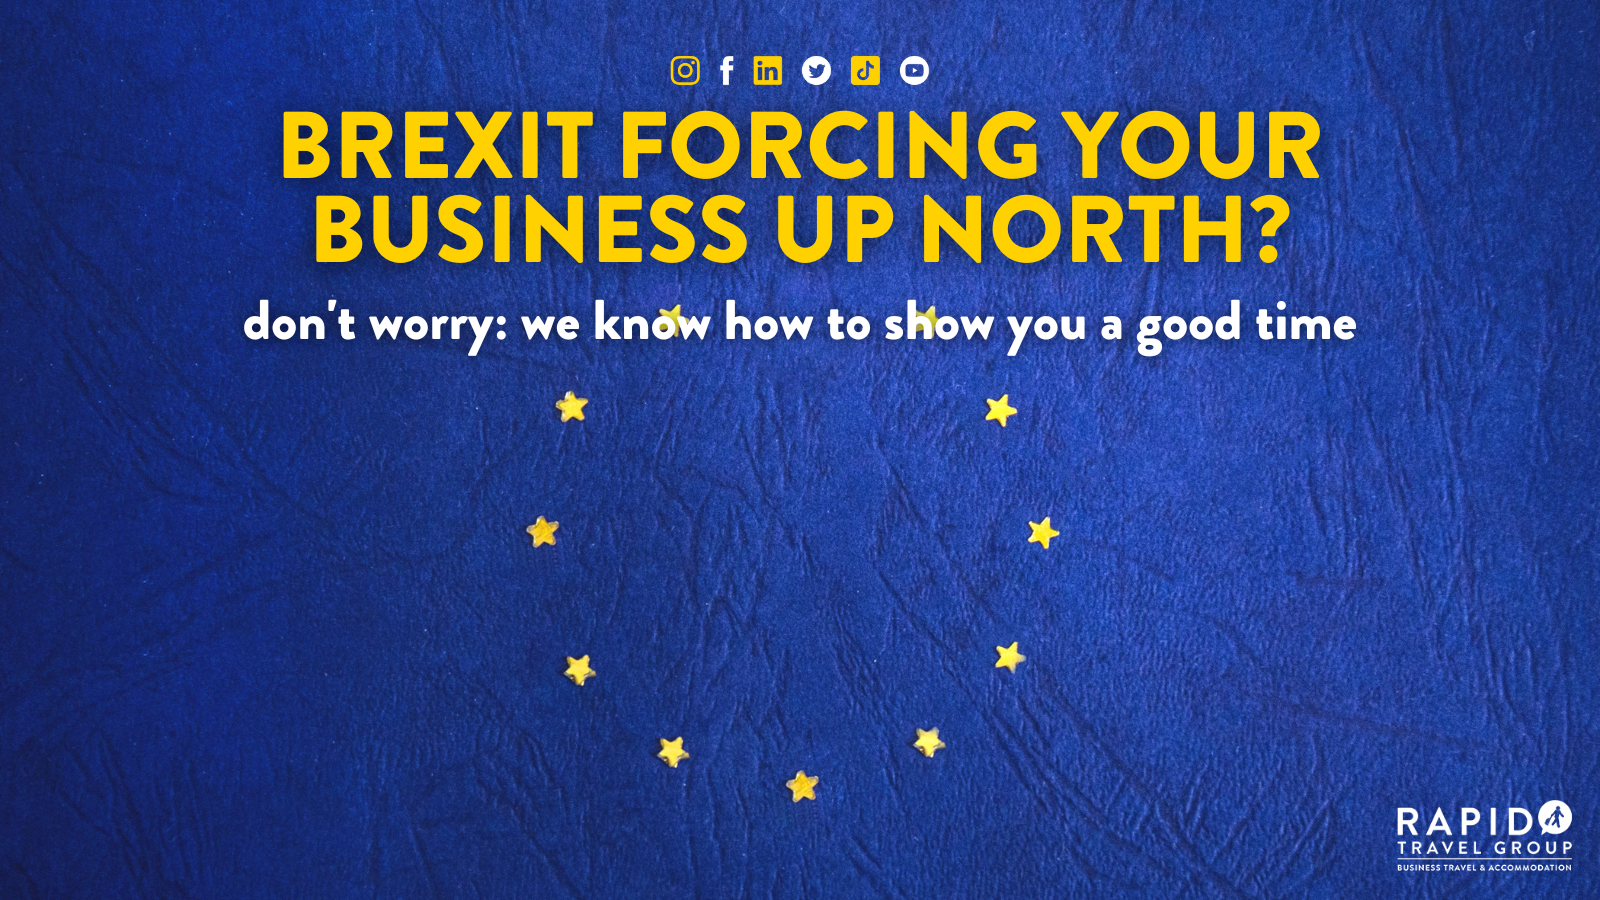 Brexit Forcing Your Business Up North? Don't worry we know how to show you a good time